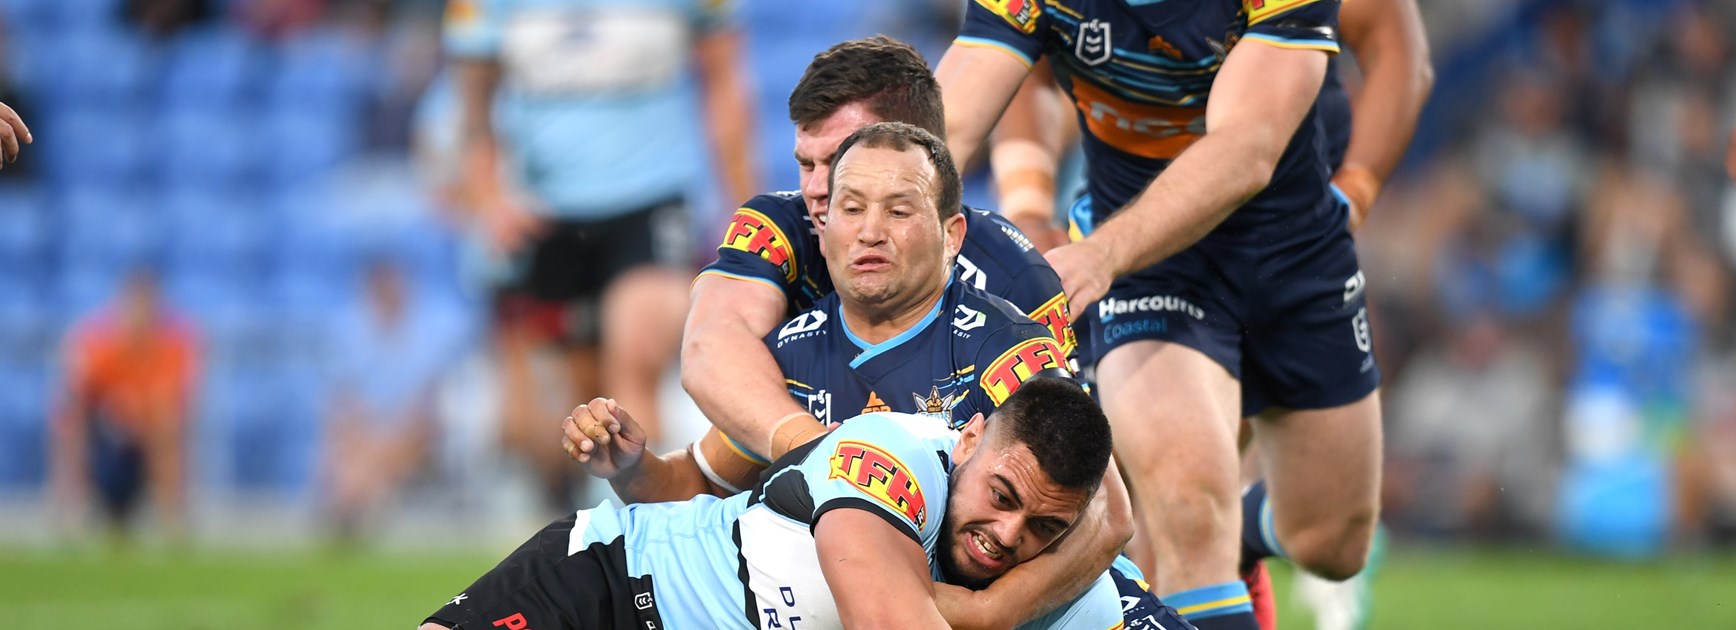 Strong second half propels Sharks to Titans victory